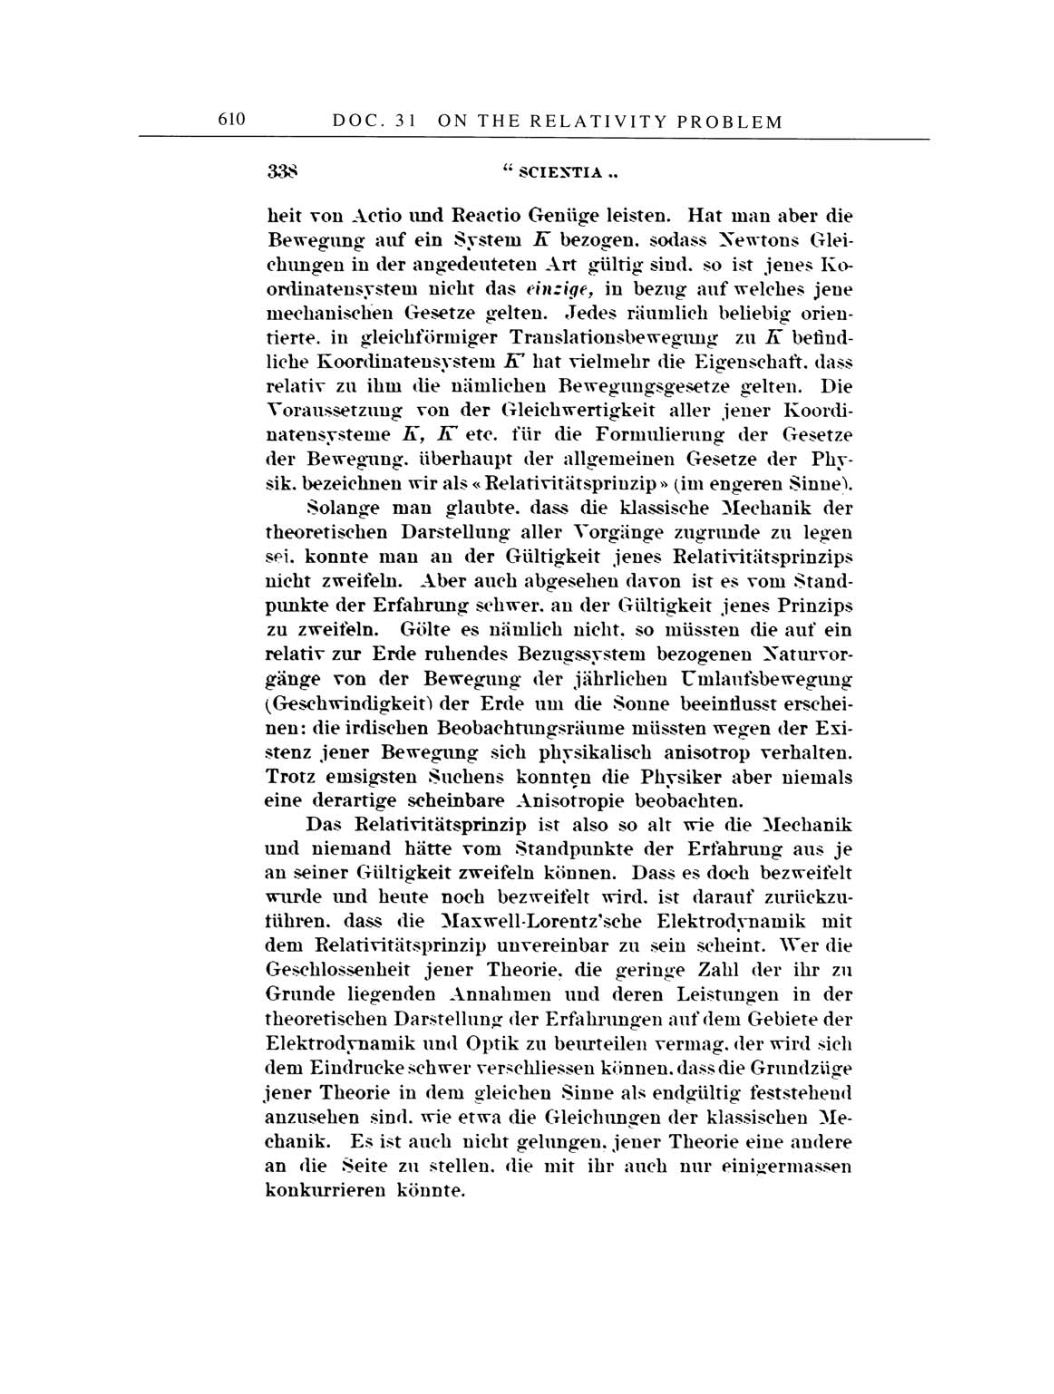 Volume 4: The Swiss Years: Writings 1912-1914 page 610